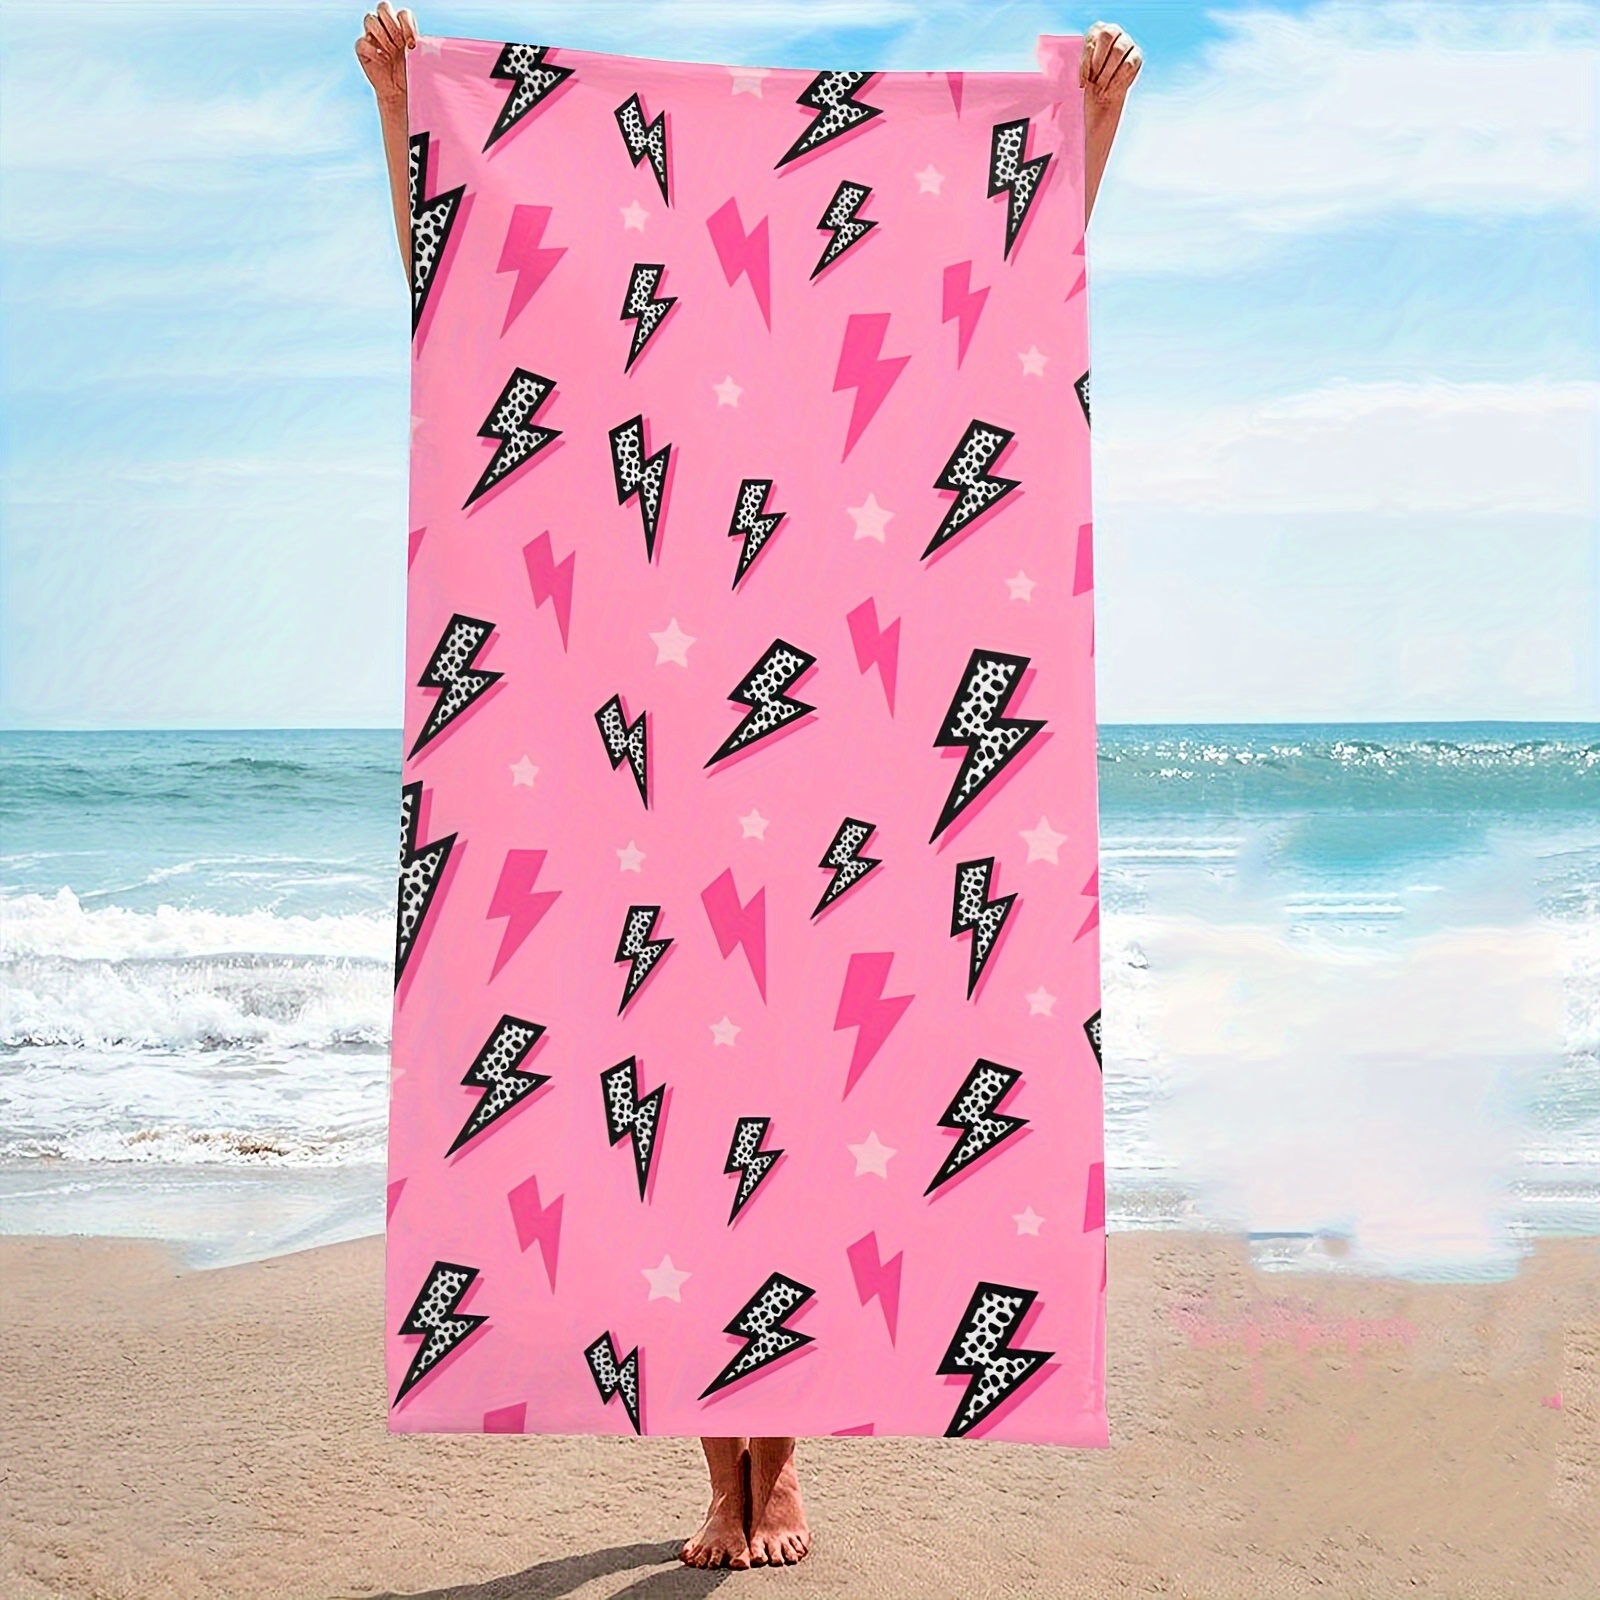 

1pc Lightning Printed Pinkish Beach Towel, Soft Sand-free Pool Towel, Absorbent Beach Blanket, Suitable For Gym Travel Outdoor Adventure, Beach Essentials